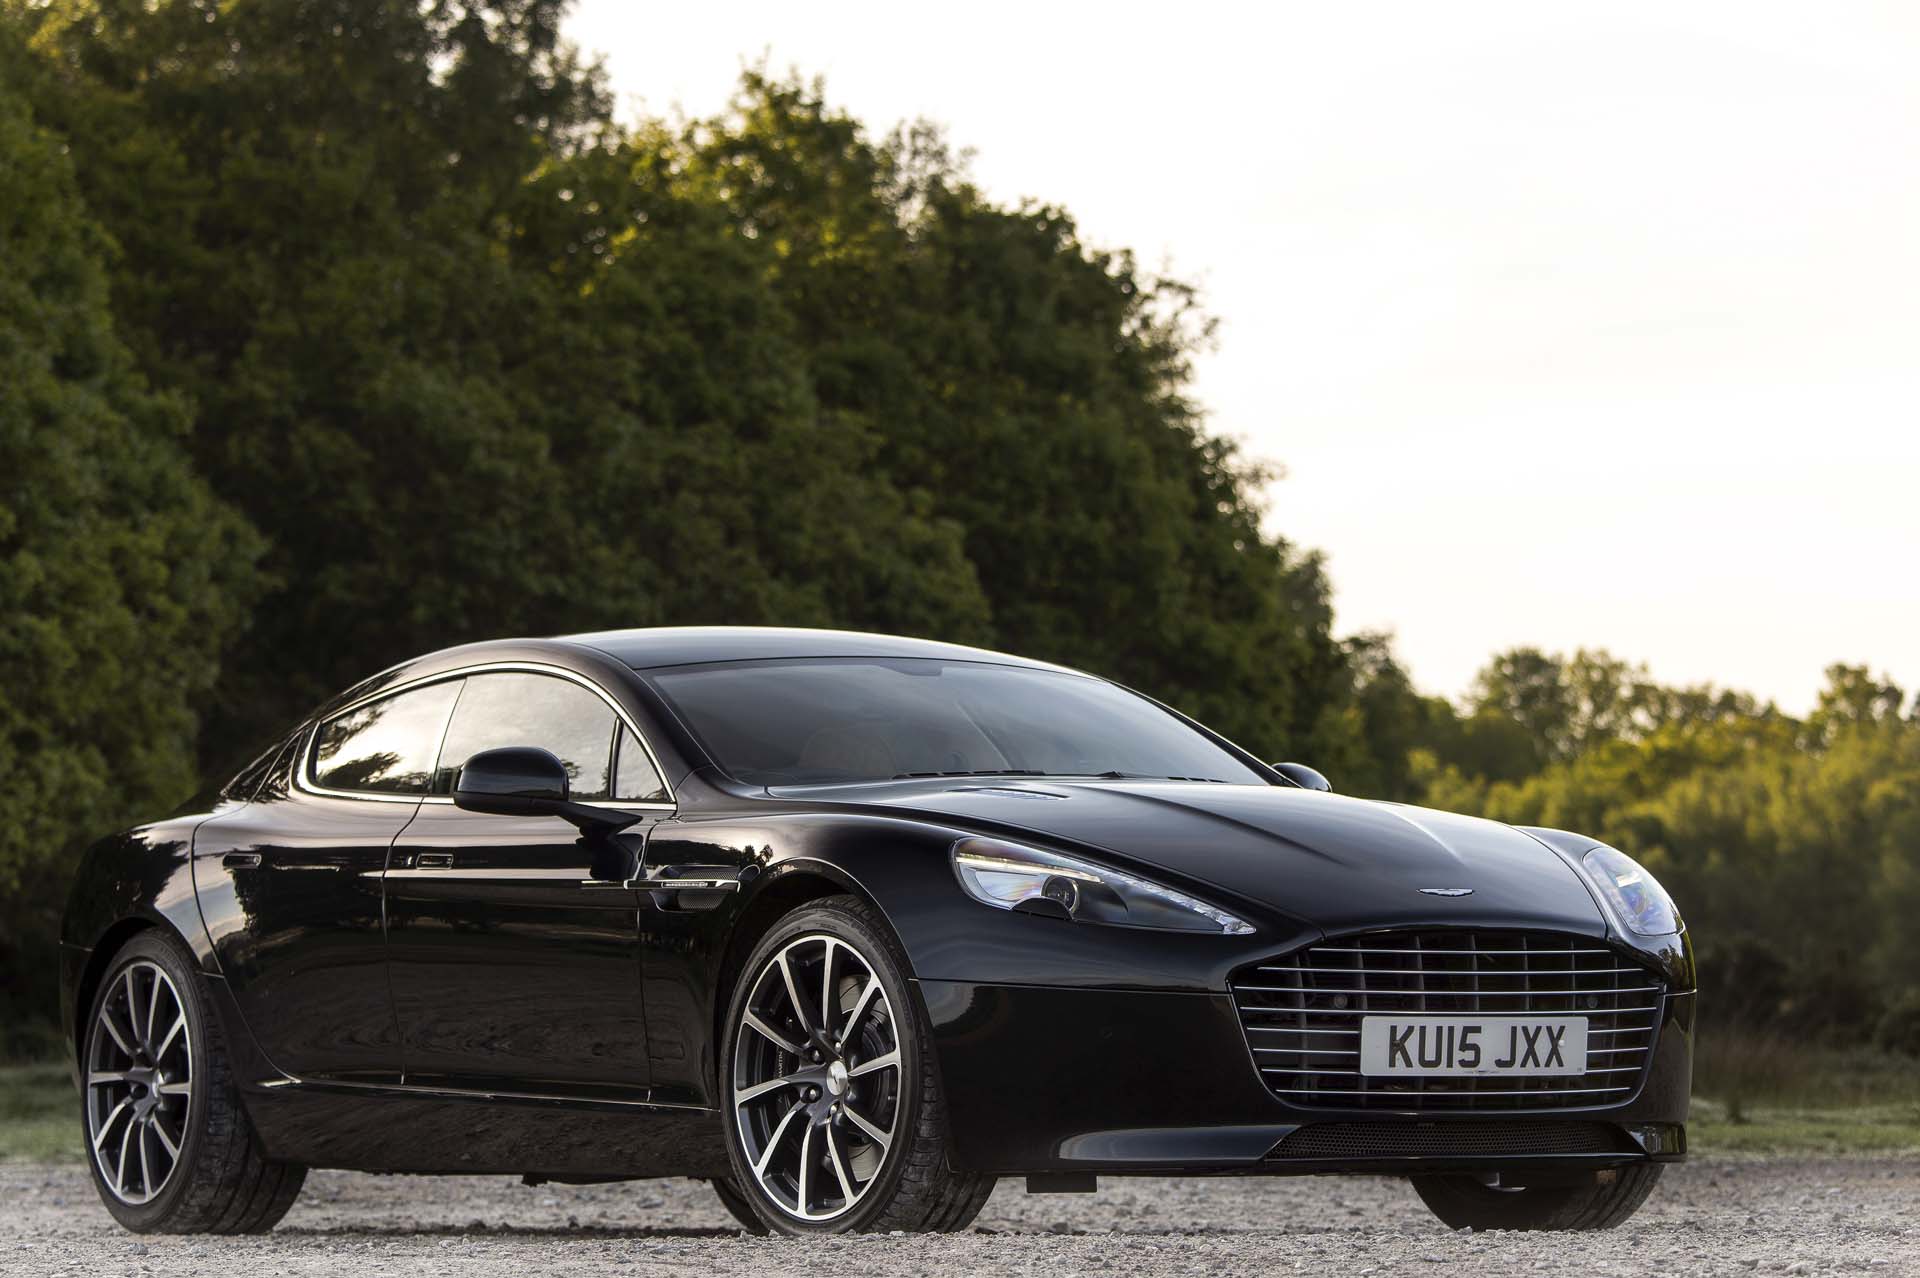 2017 Aston Martin Rapide Summary Review - The Car Connection